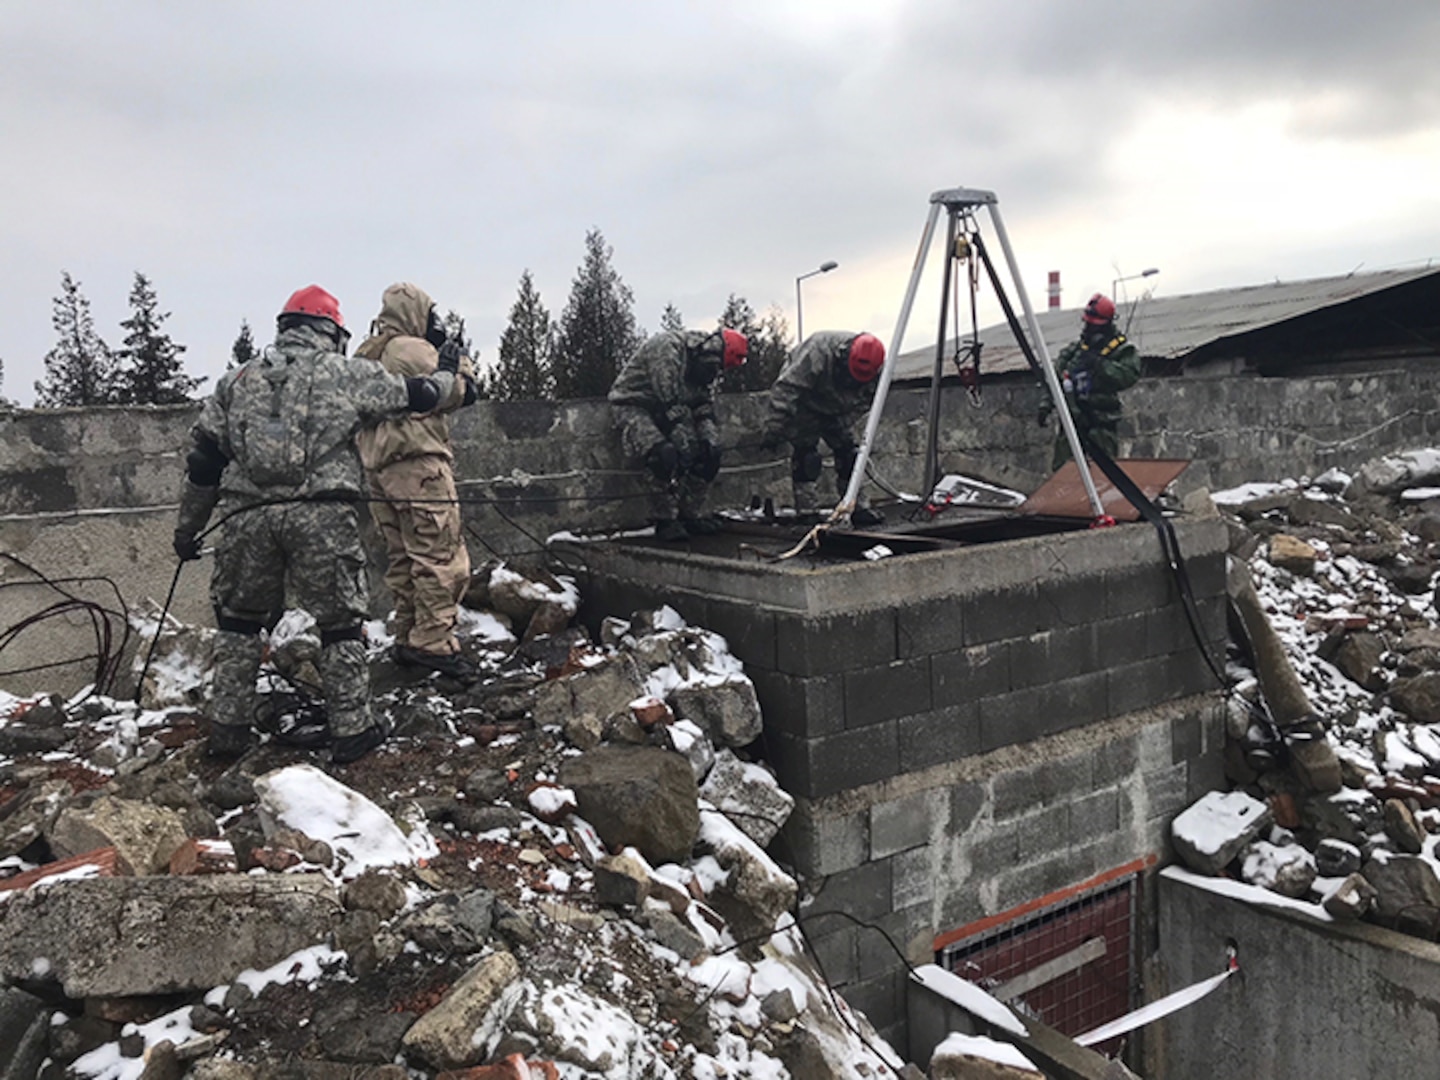 Texas Army National Guard engineers from the 836h Engineer Company, 136th Maneuver Enhancement Brigade, work alongside soldiers from the Indiana National Guard, the Czech Republic and Slovakia in support of Operation Toxic Lance, a search and rescue exercise involving a chemical warfare scenario, March 12-23, 2018, at Training Area Lest in central Slovakia. The soldiers were brought together as part of the National Guard Bureau’s State Partnership Program that focuses on building interoperability and strengthening international relationships through military-to-military exchanges.